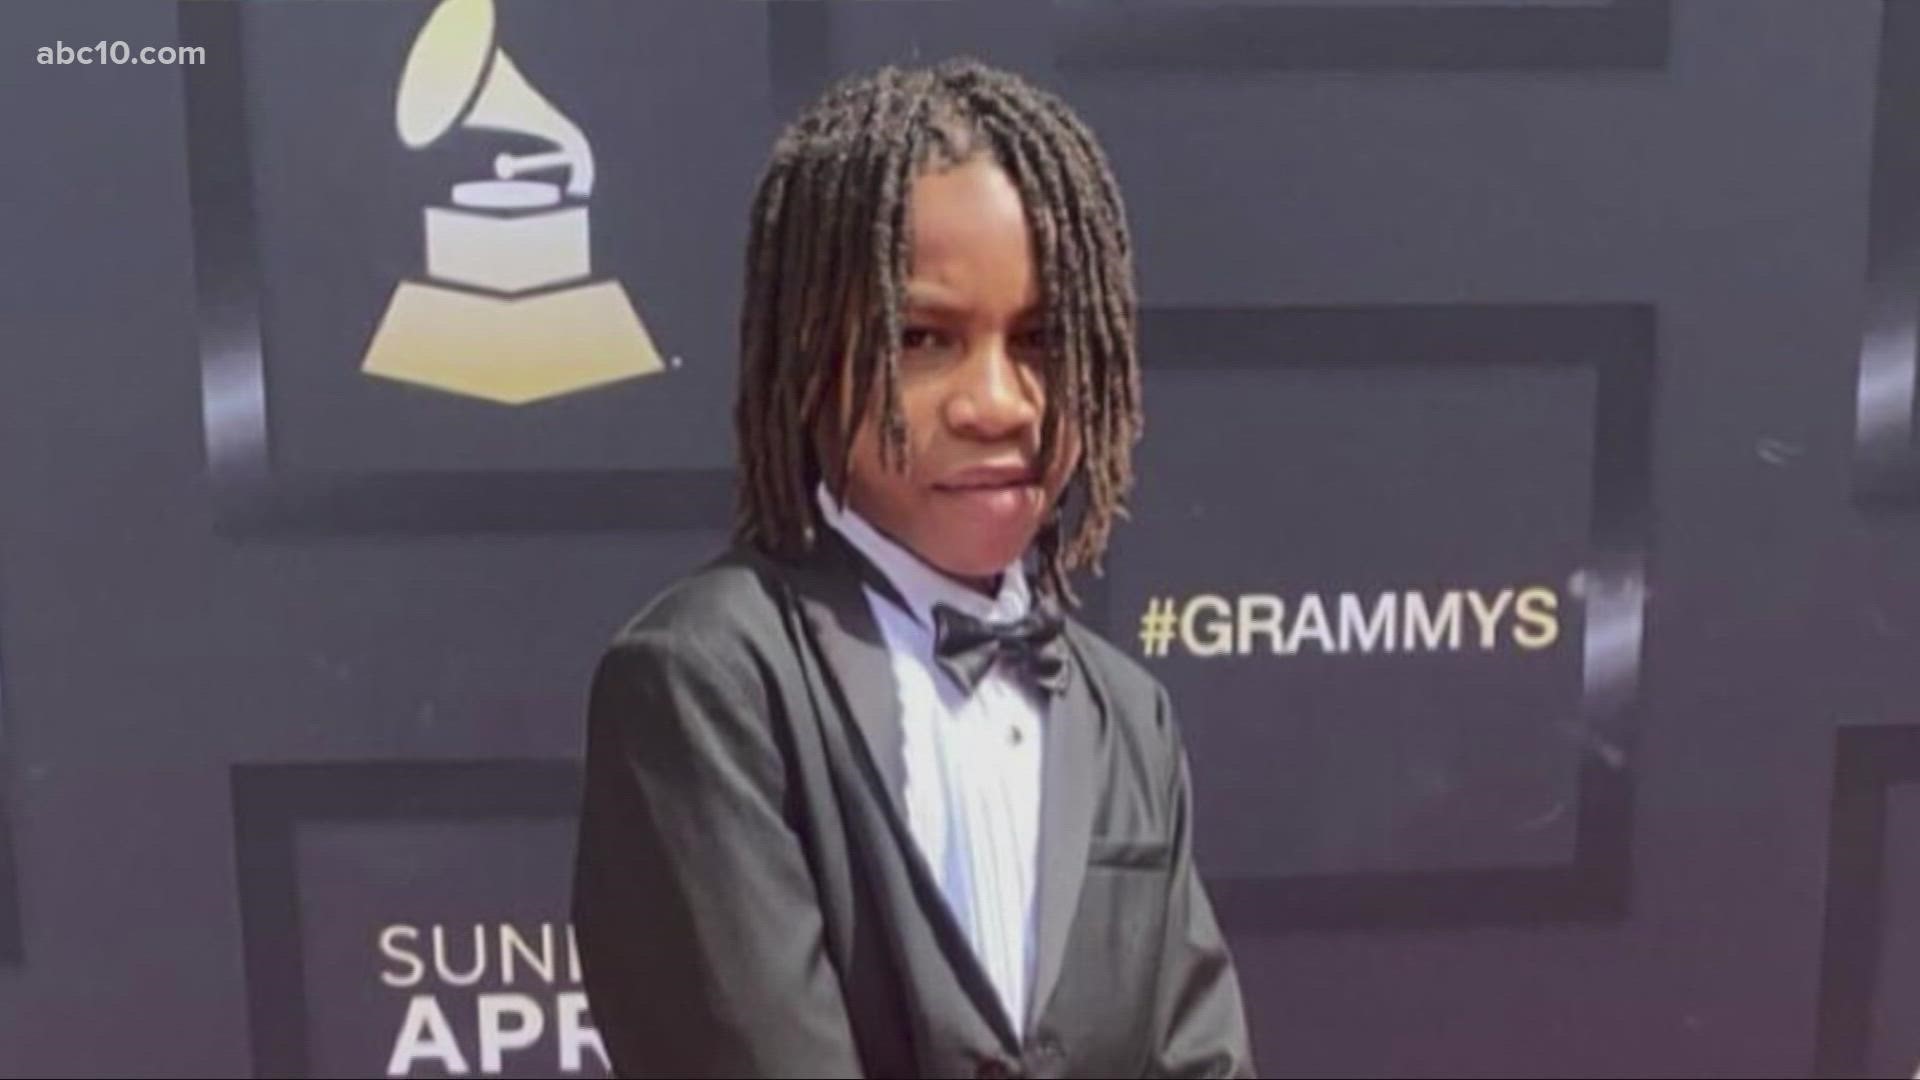 Our Mark S. Allen spoke to the elementary school student's teachers, principle and father about how the young man carried himself at the Grammy Awards.